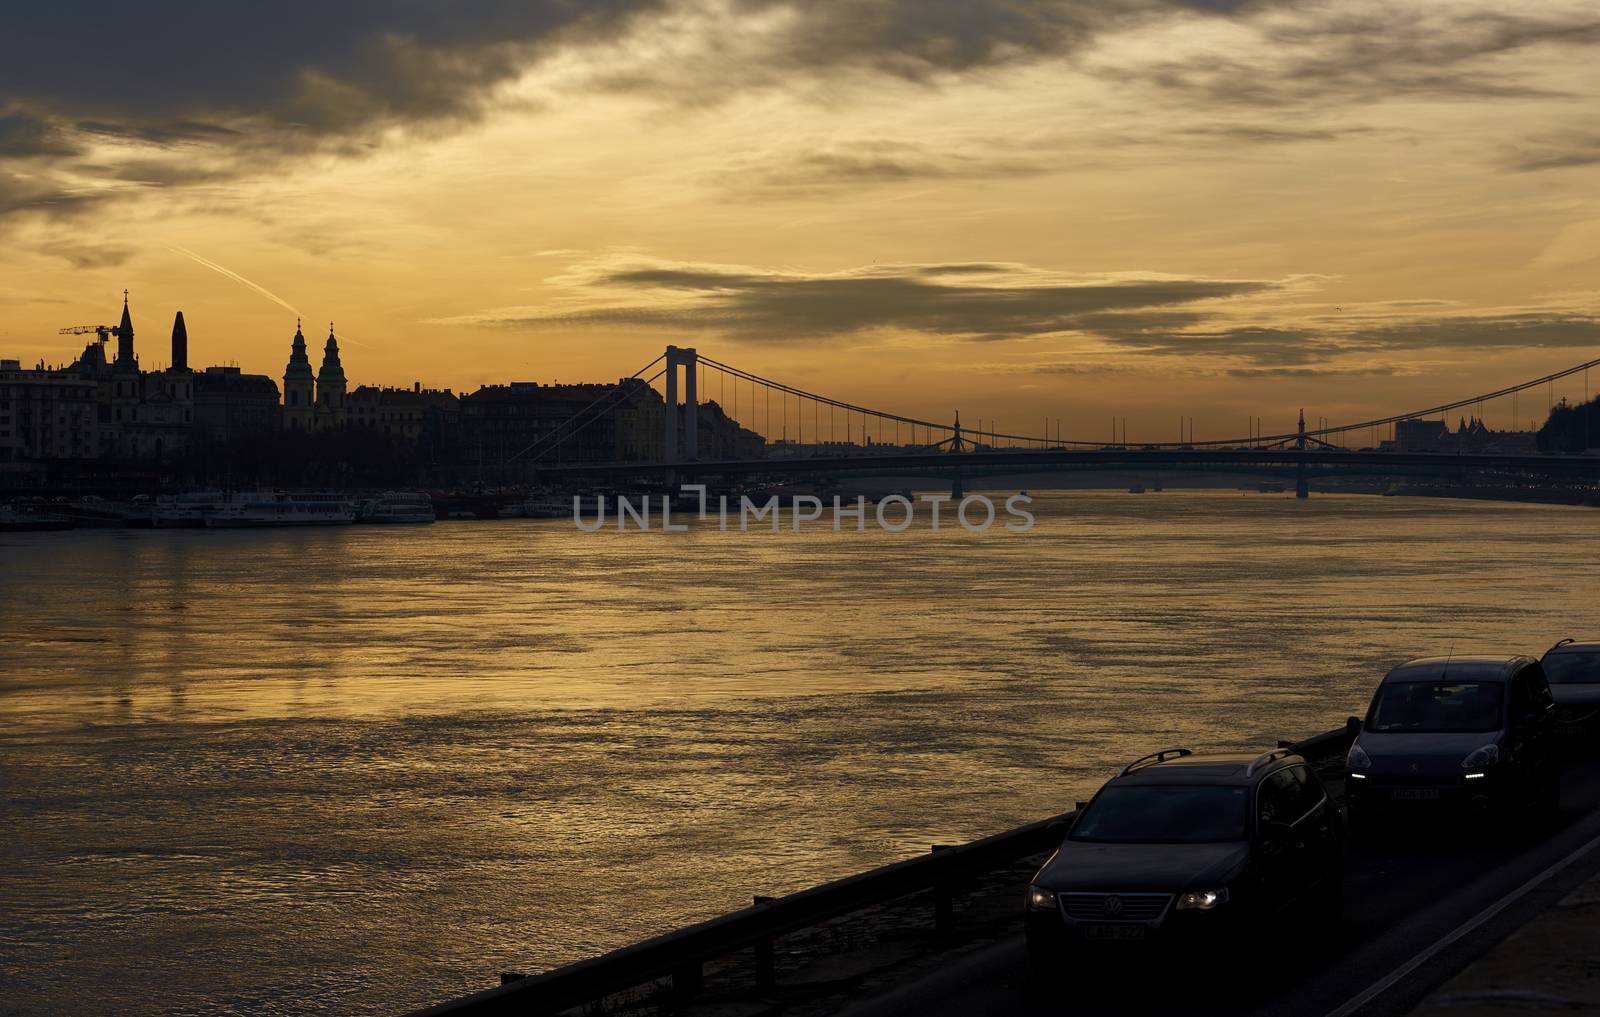 BUDAPEST, HUNGARY - FEBRUARY 02: Semi-silhouette of traffic by Danube River, with orange sunrise in the background. February 02, 2016 in Budapest.